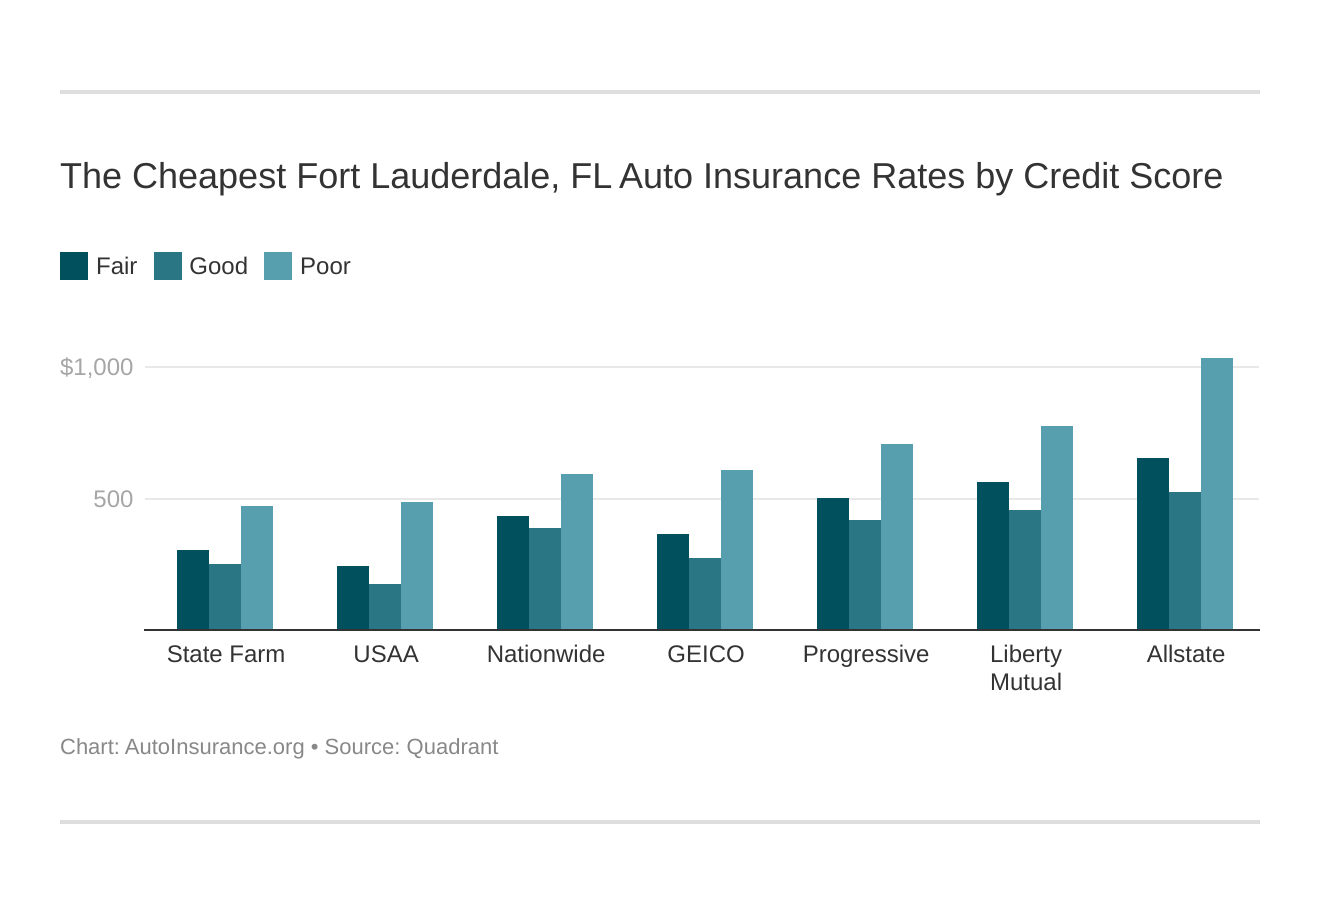 The Cheapest Fort Lauderdale, FL Auto Insurance Rates by Credit Score